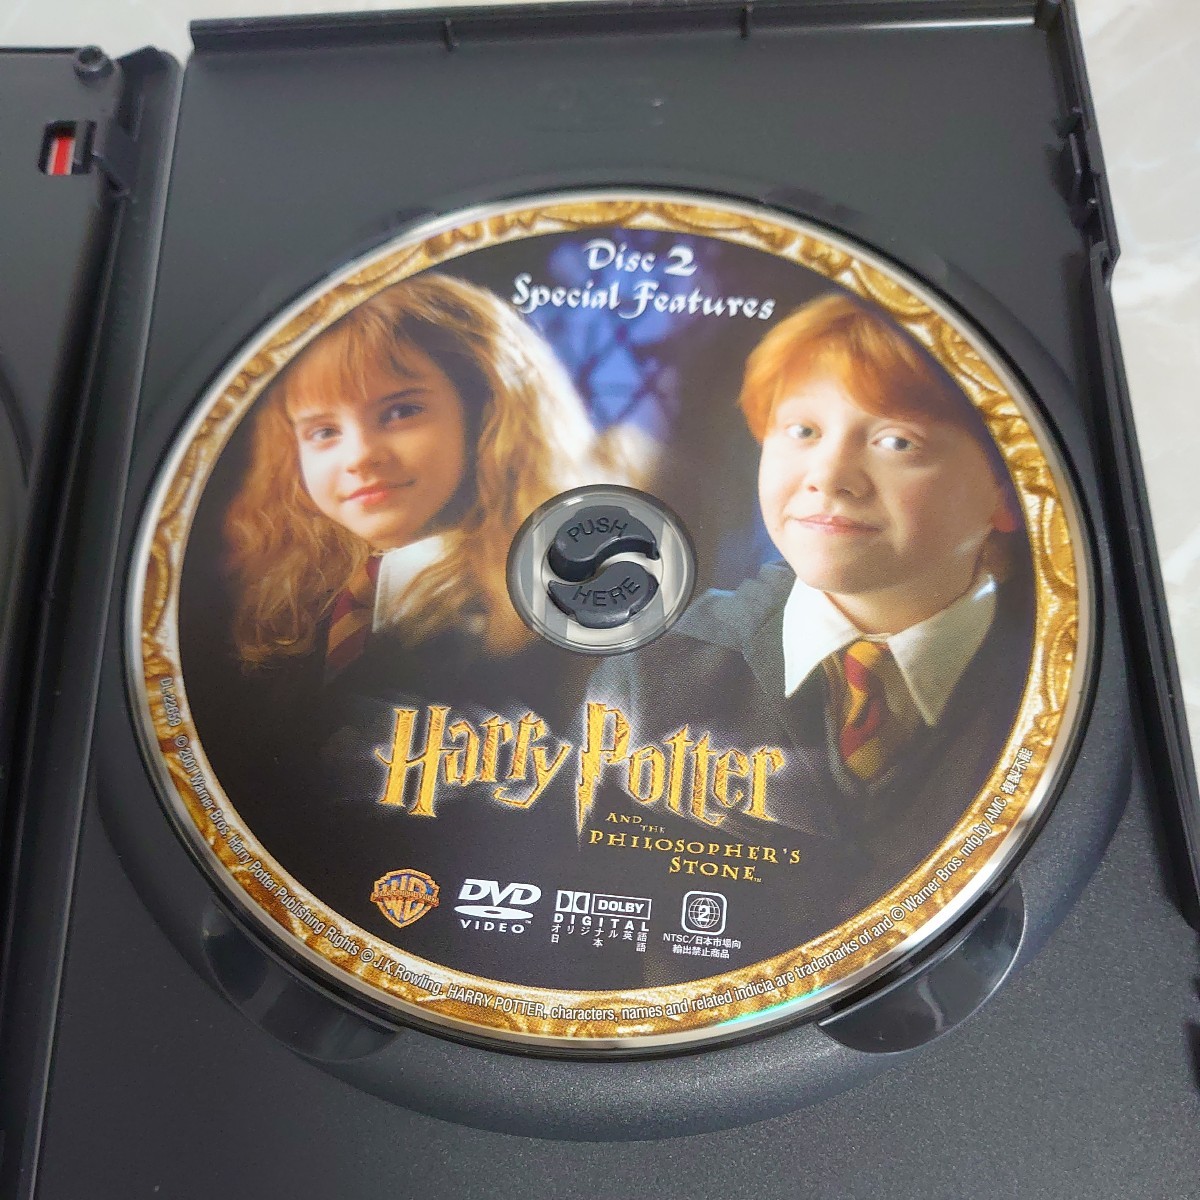 DVD Harry Potter .. person. stone 2 sheets set secondhand goods 592